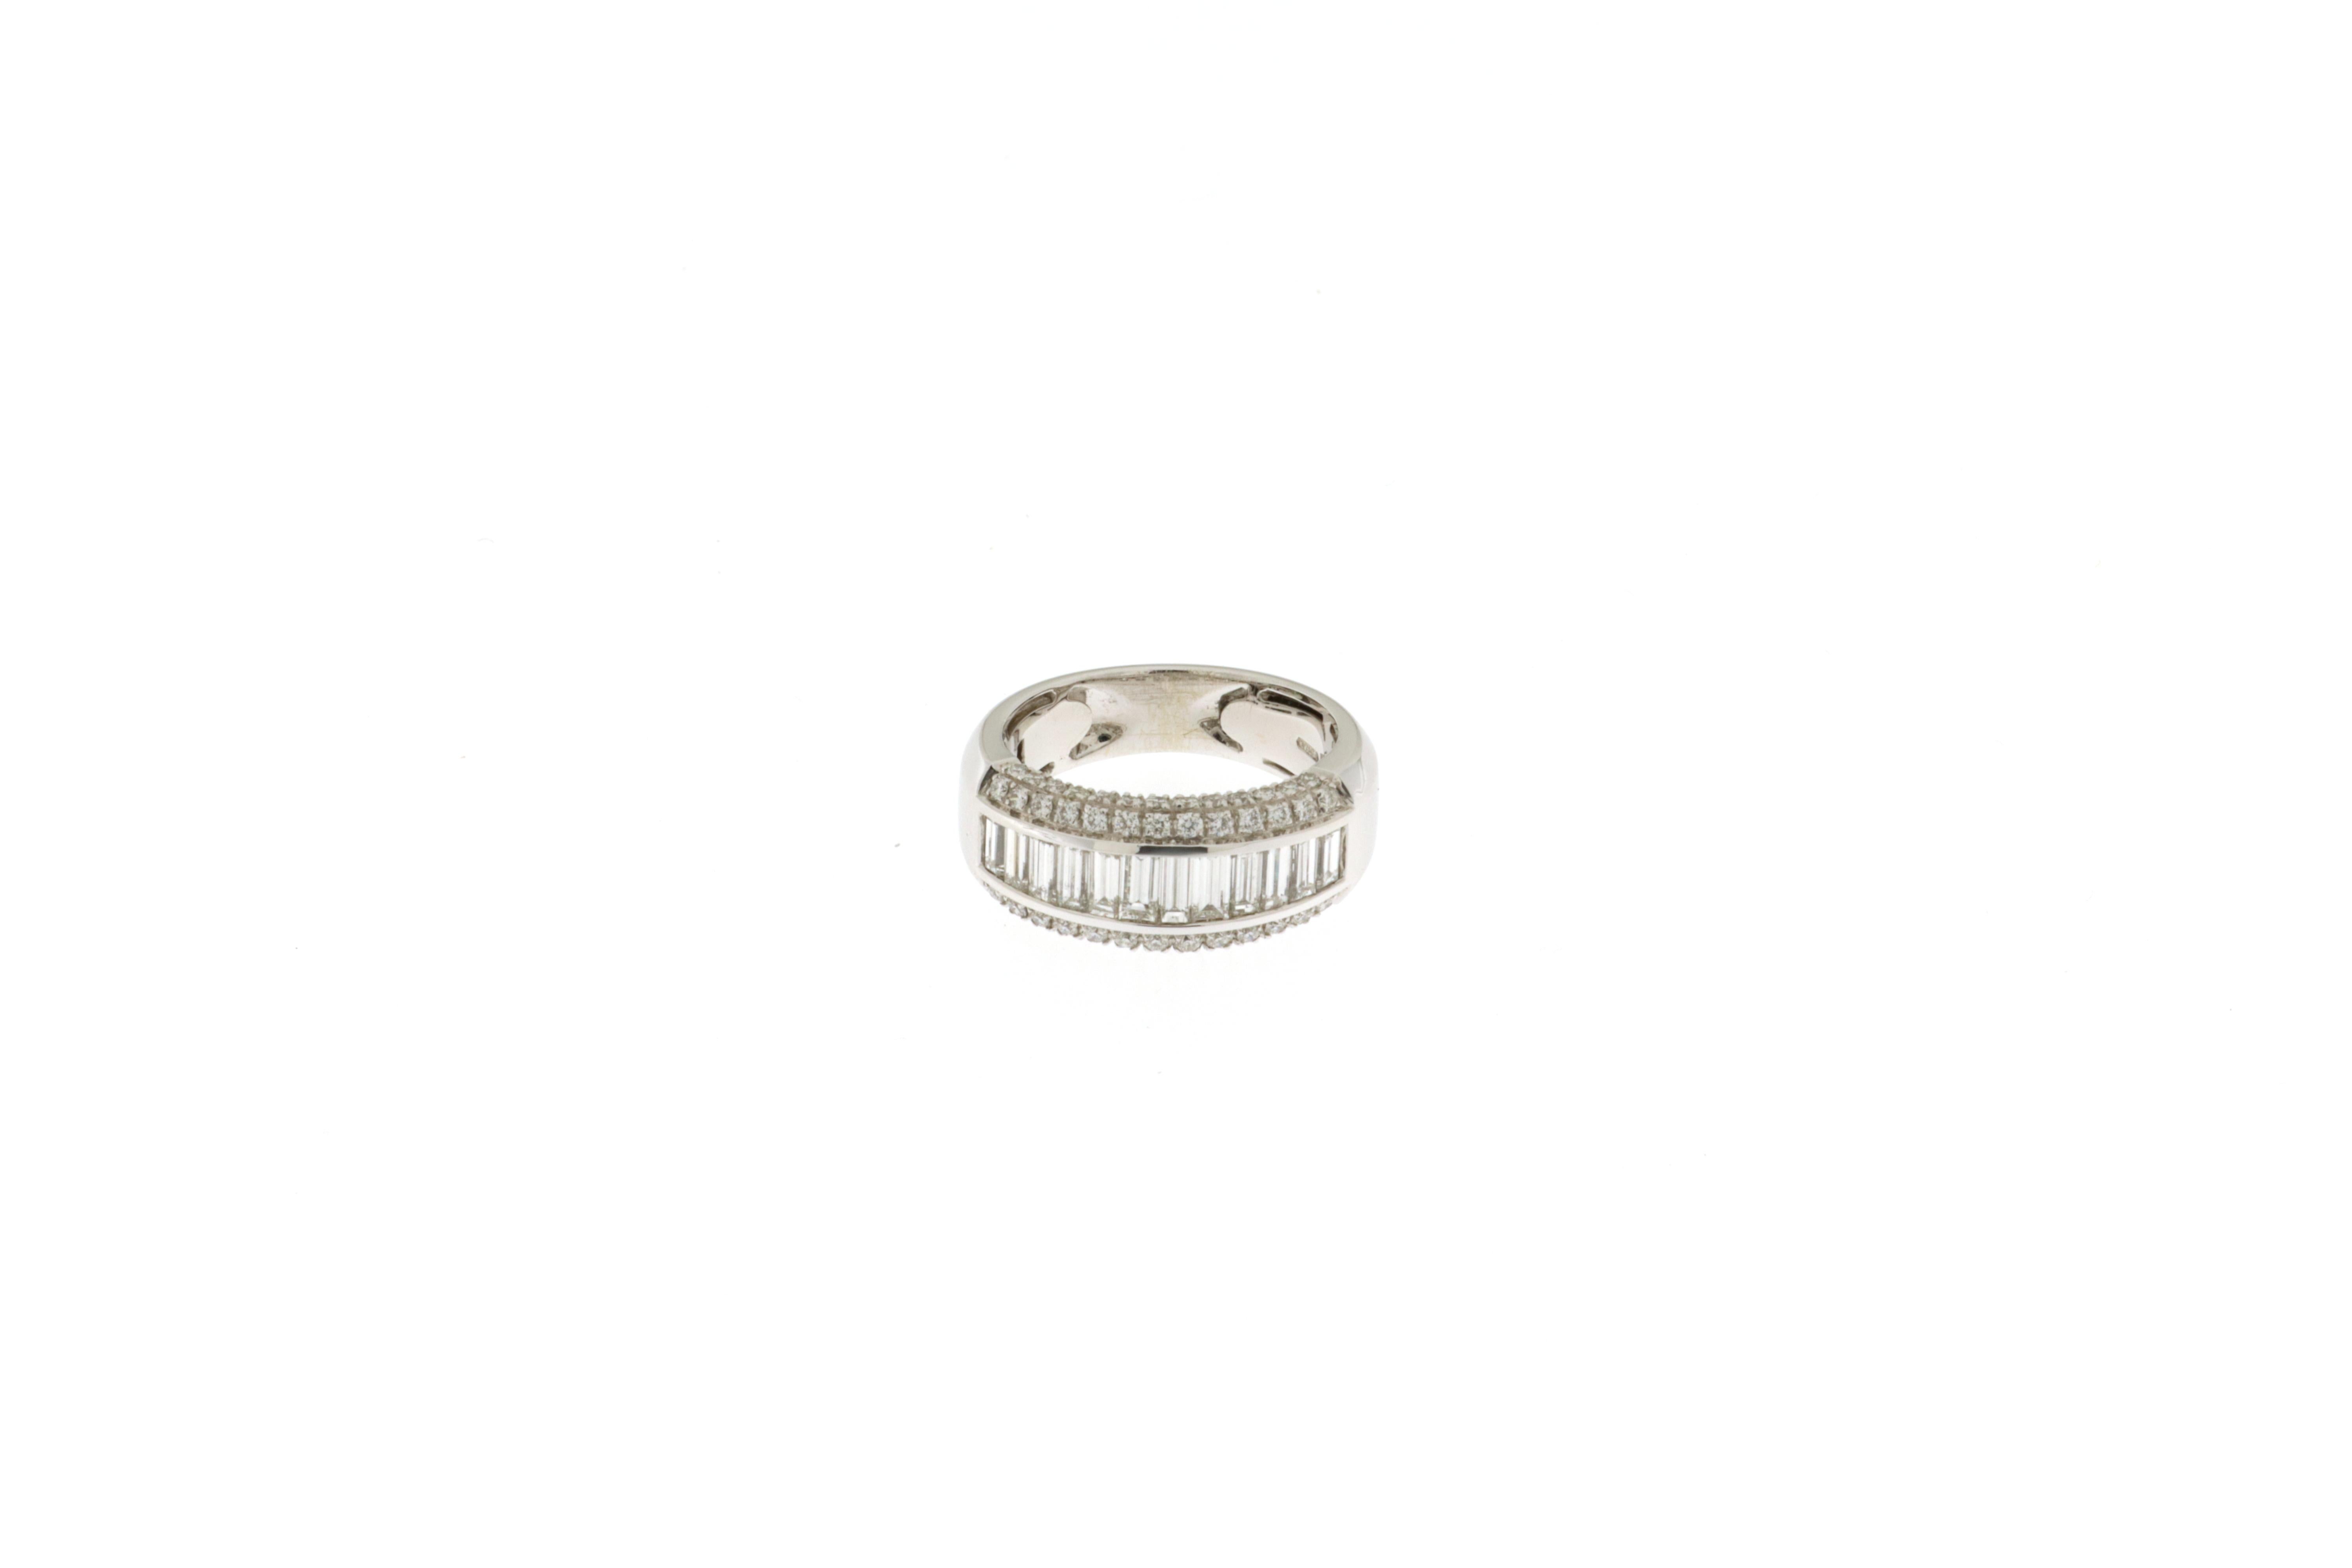 18K white gold band ring with baguette-cut diamonds ct. 1.69 set in the center and brilliant-cut diamonds ct.0.54, which finish the ring on the outer edges, making the ring very beautiful to see from the side as well.
This band can be worn as a